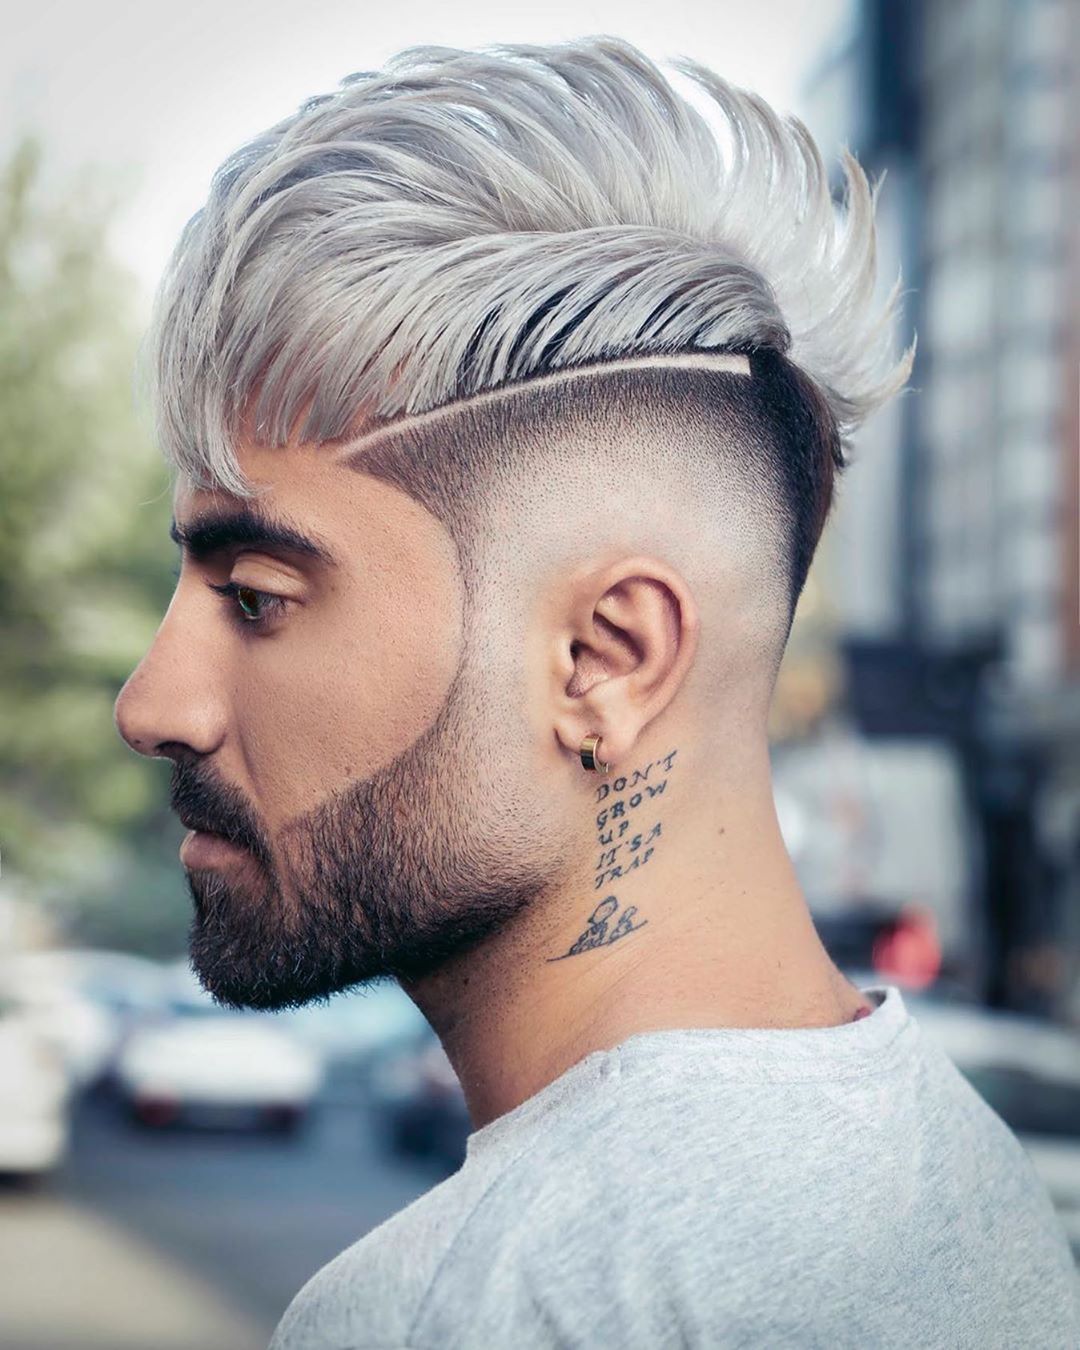 89 Cute New Hair Style 2020 Man Short for Trend 2022